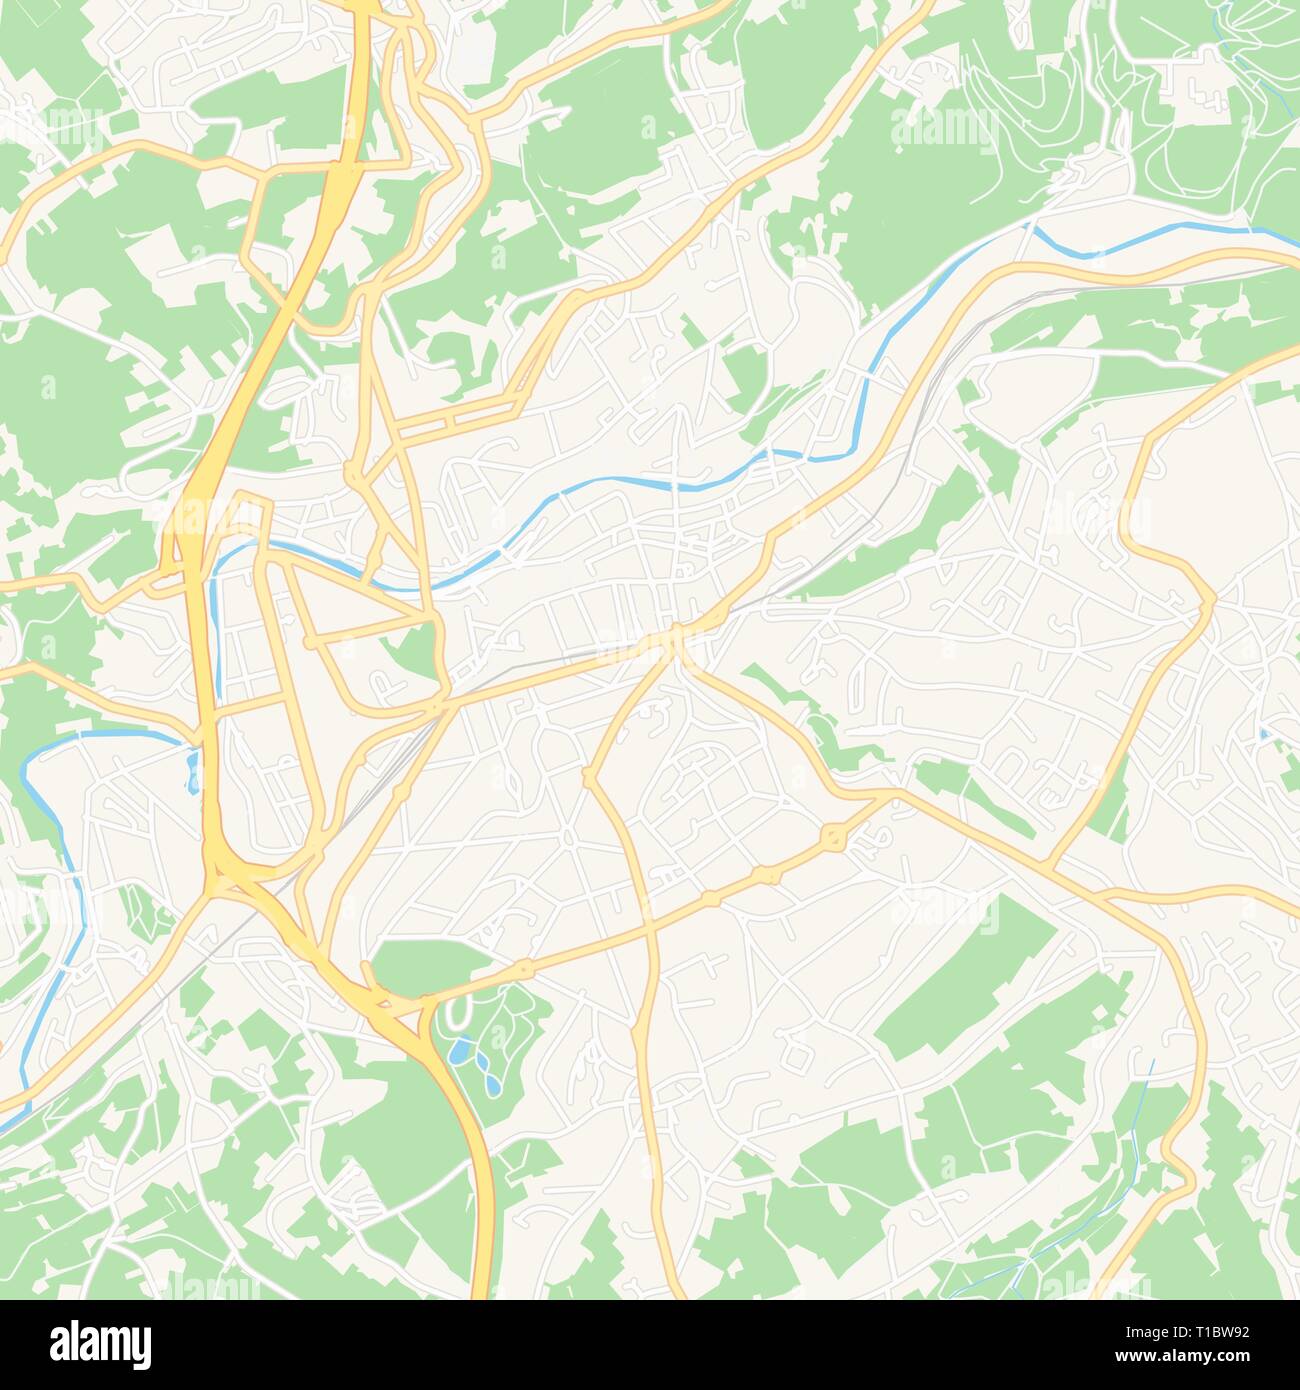 Printable map of Verviers, Belgium with main and secondary roads and larger railways. This map is carefully designed for routing and placing individua Stock Vector